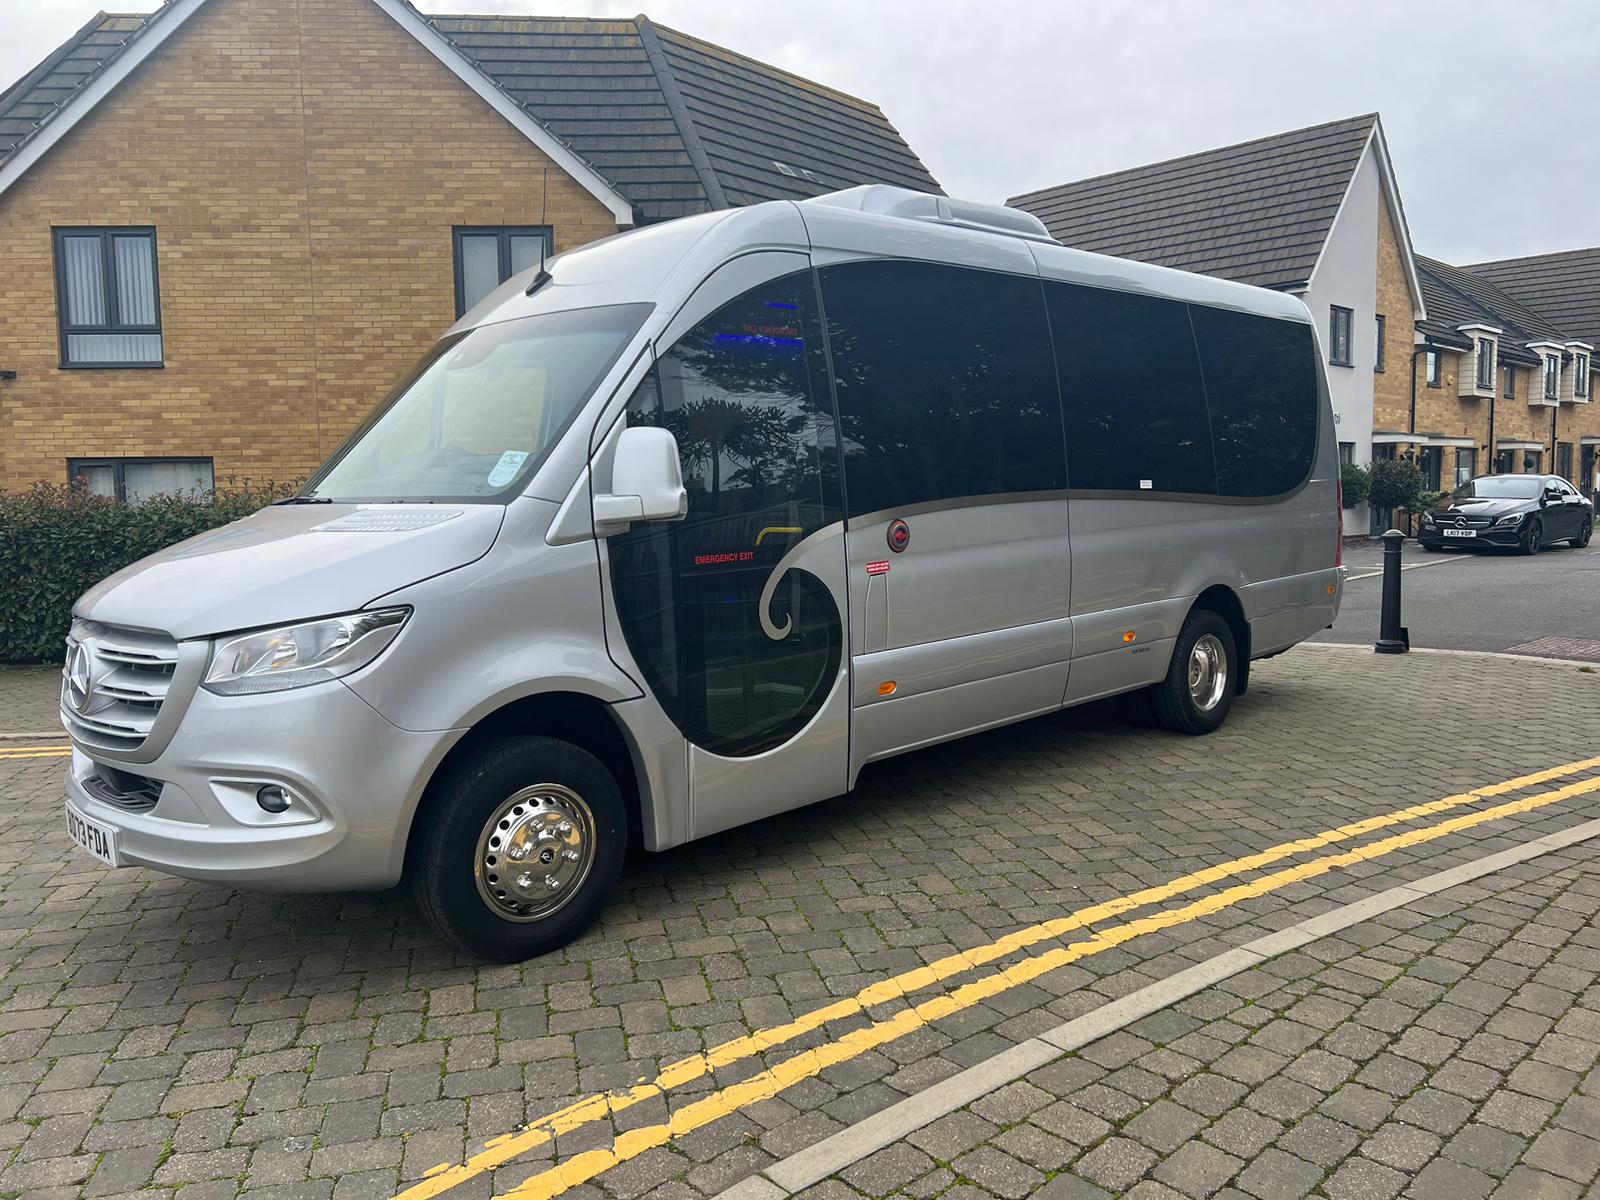 What to Expect in Terms of Cost When Hiring a Minibus in London